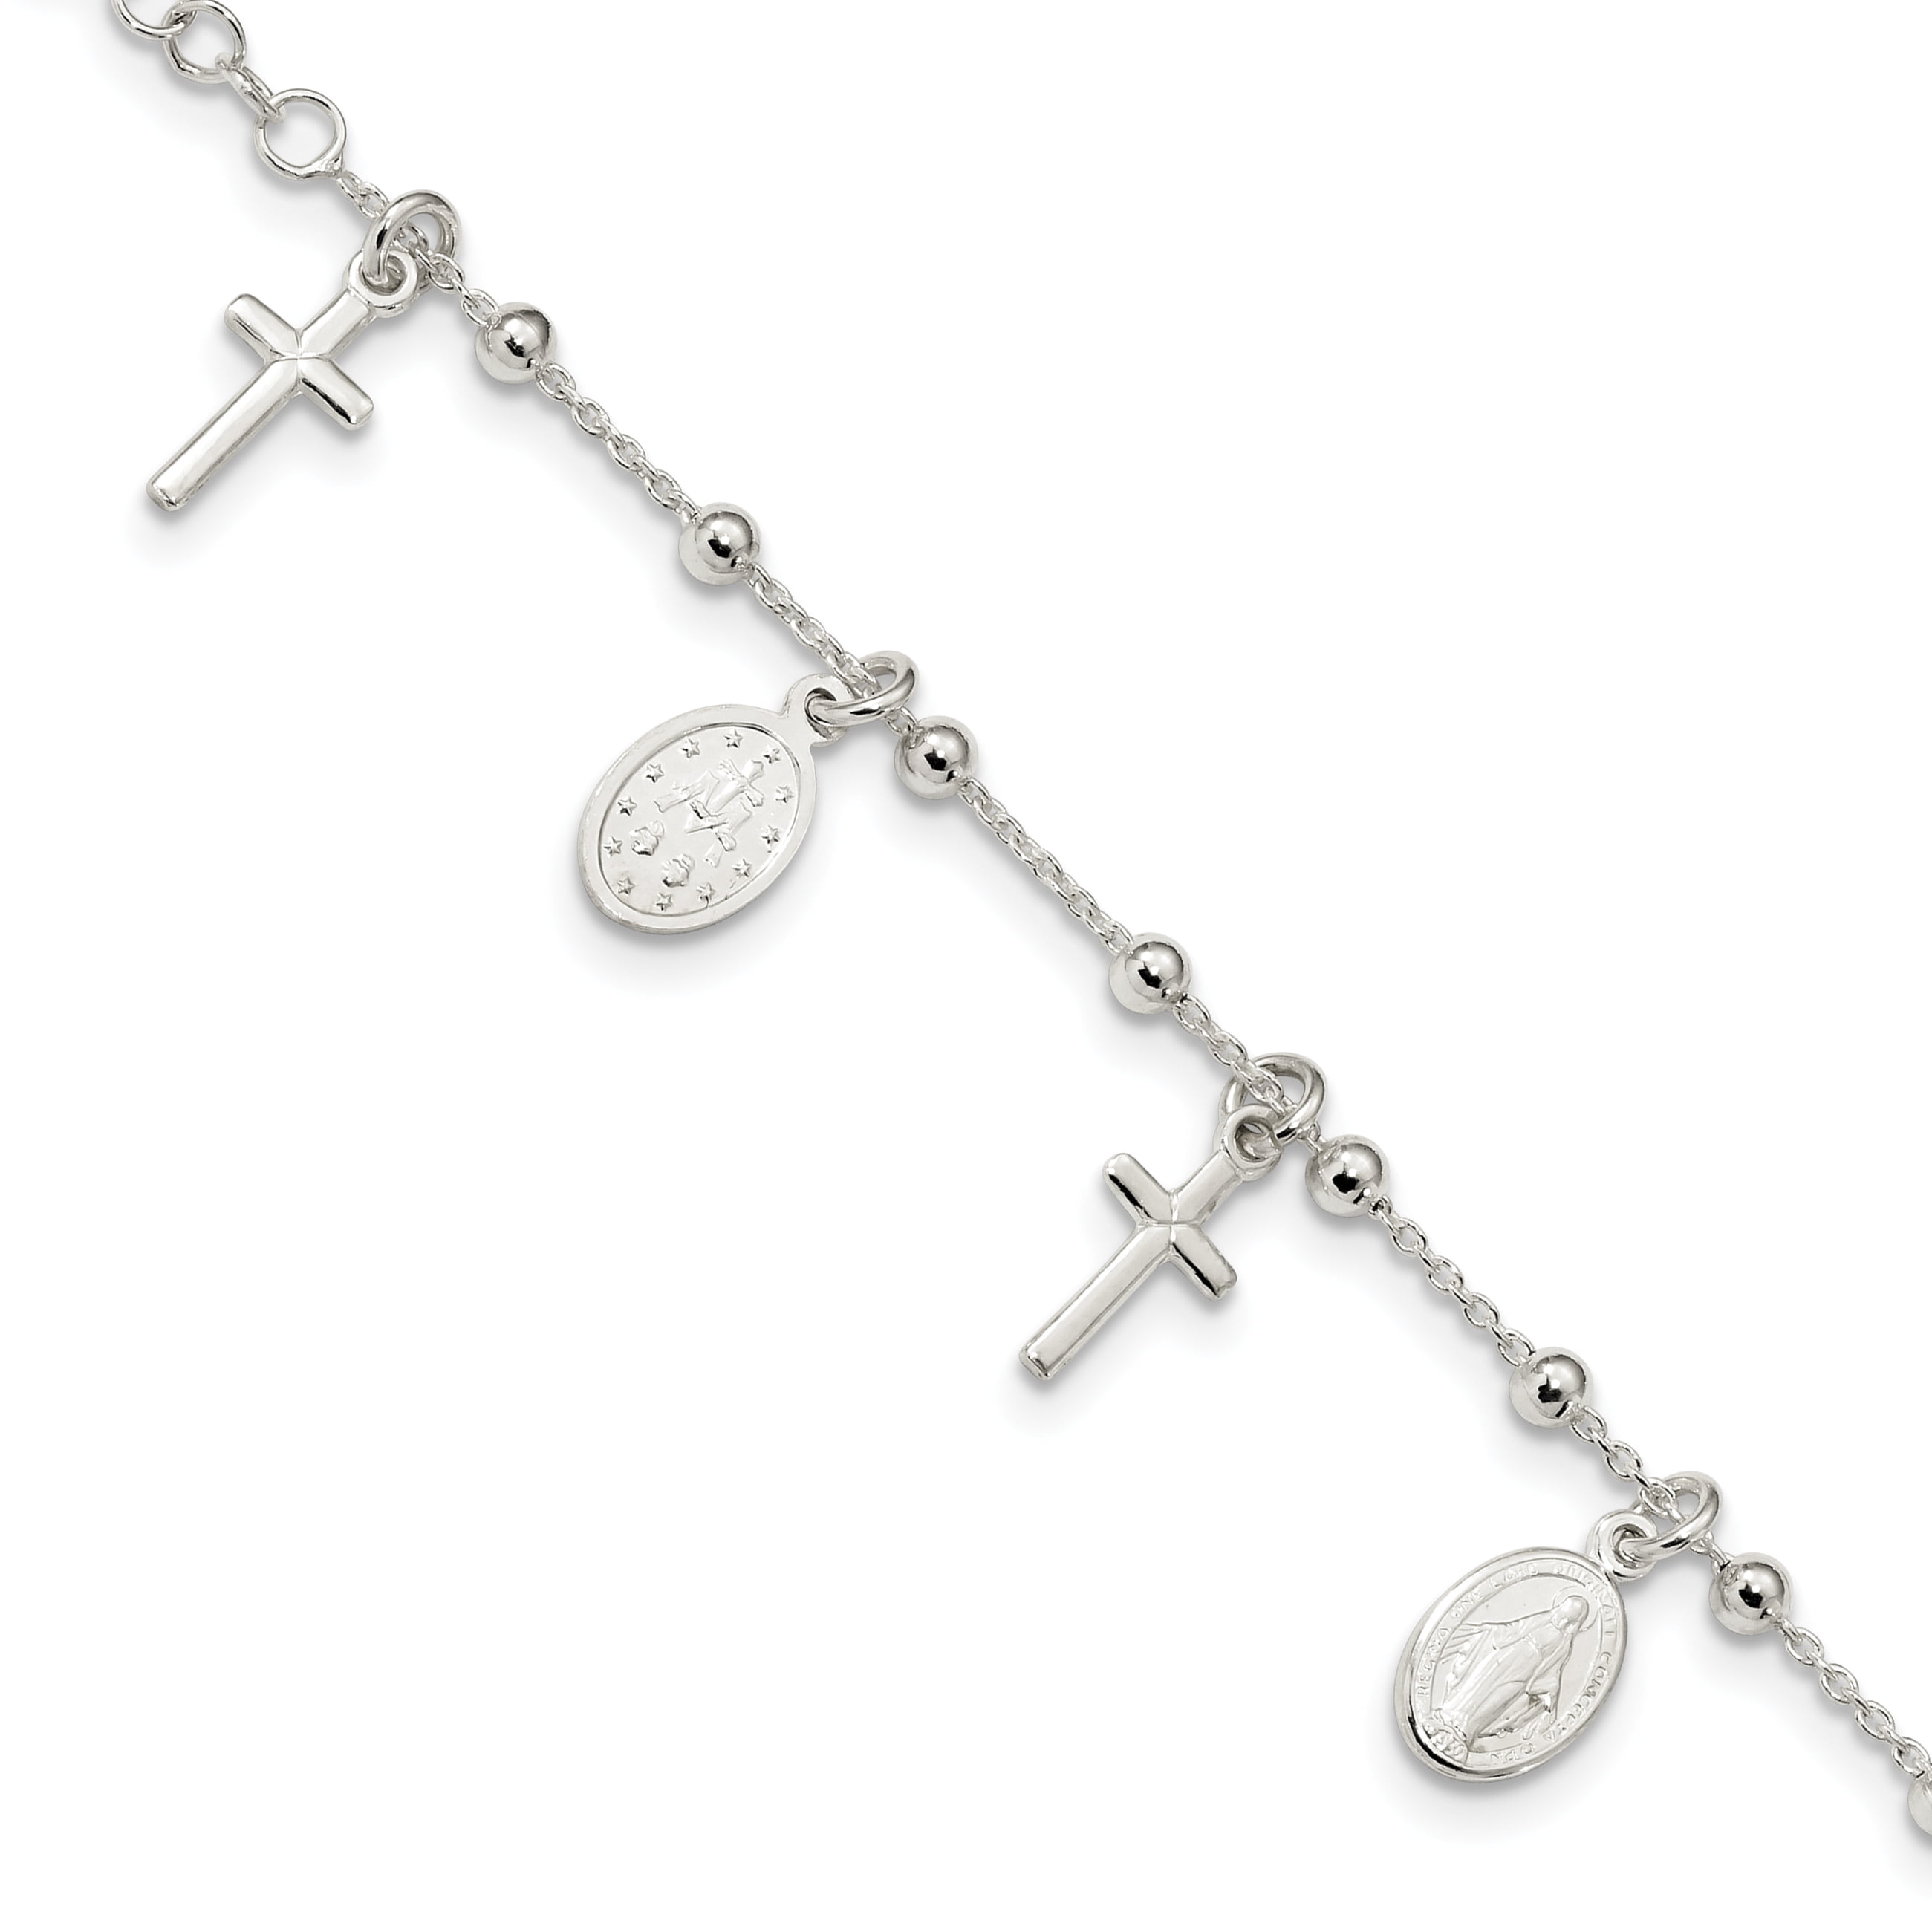 The charm features a Miraculous medal. The Crucifix measures 5/8 x 1/4 Silver Plate Rosary Bracelet features 6mm Sapphire Fire Polished beads 